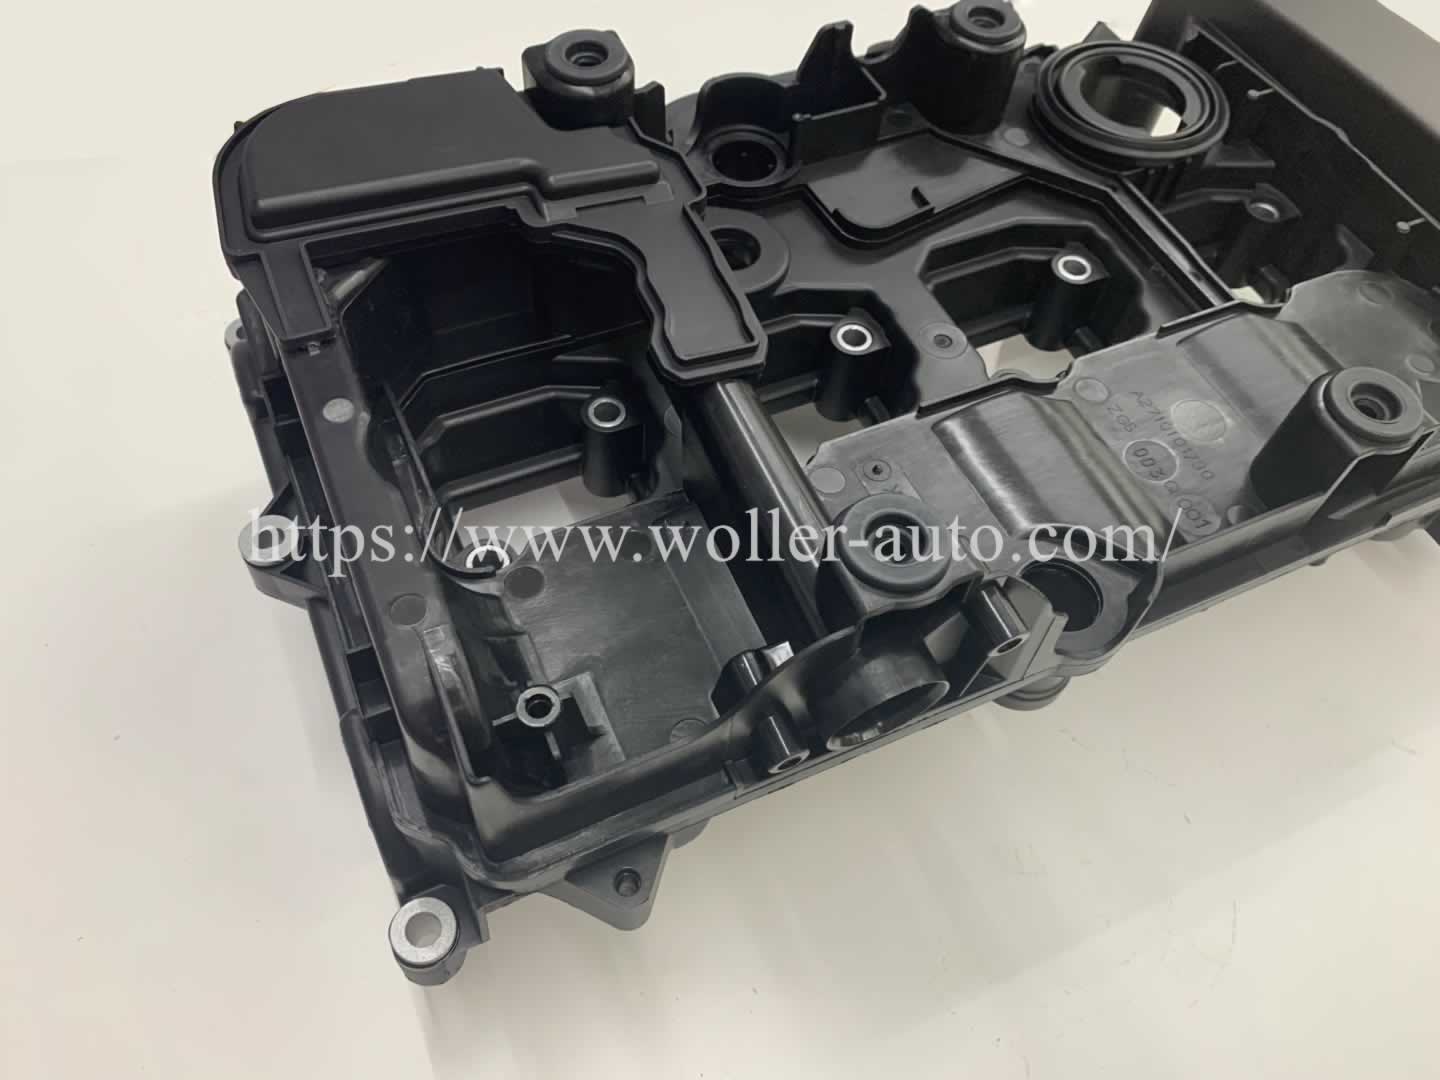 OE 2710101730 For MERCEDES BENZ 2012-2015 C250 Engine Valve Cover A2710101730